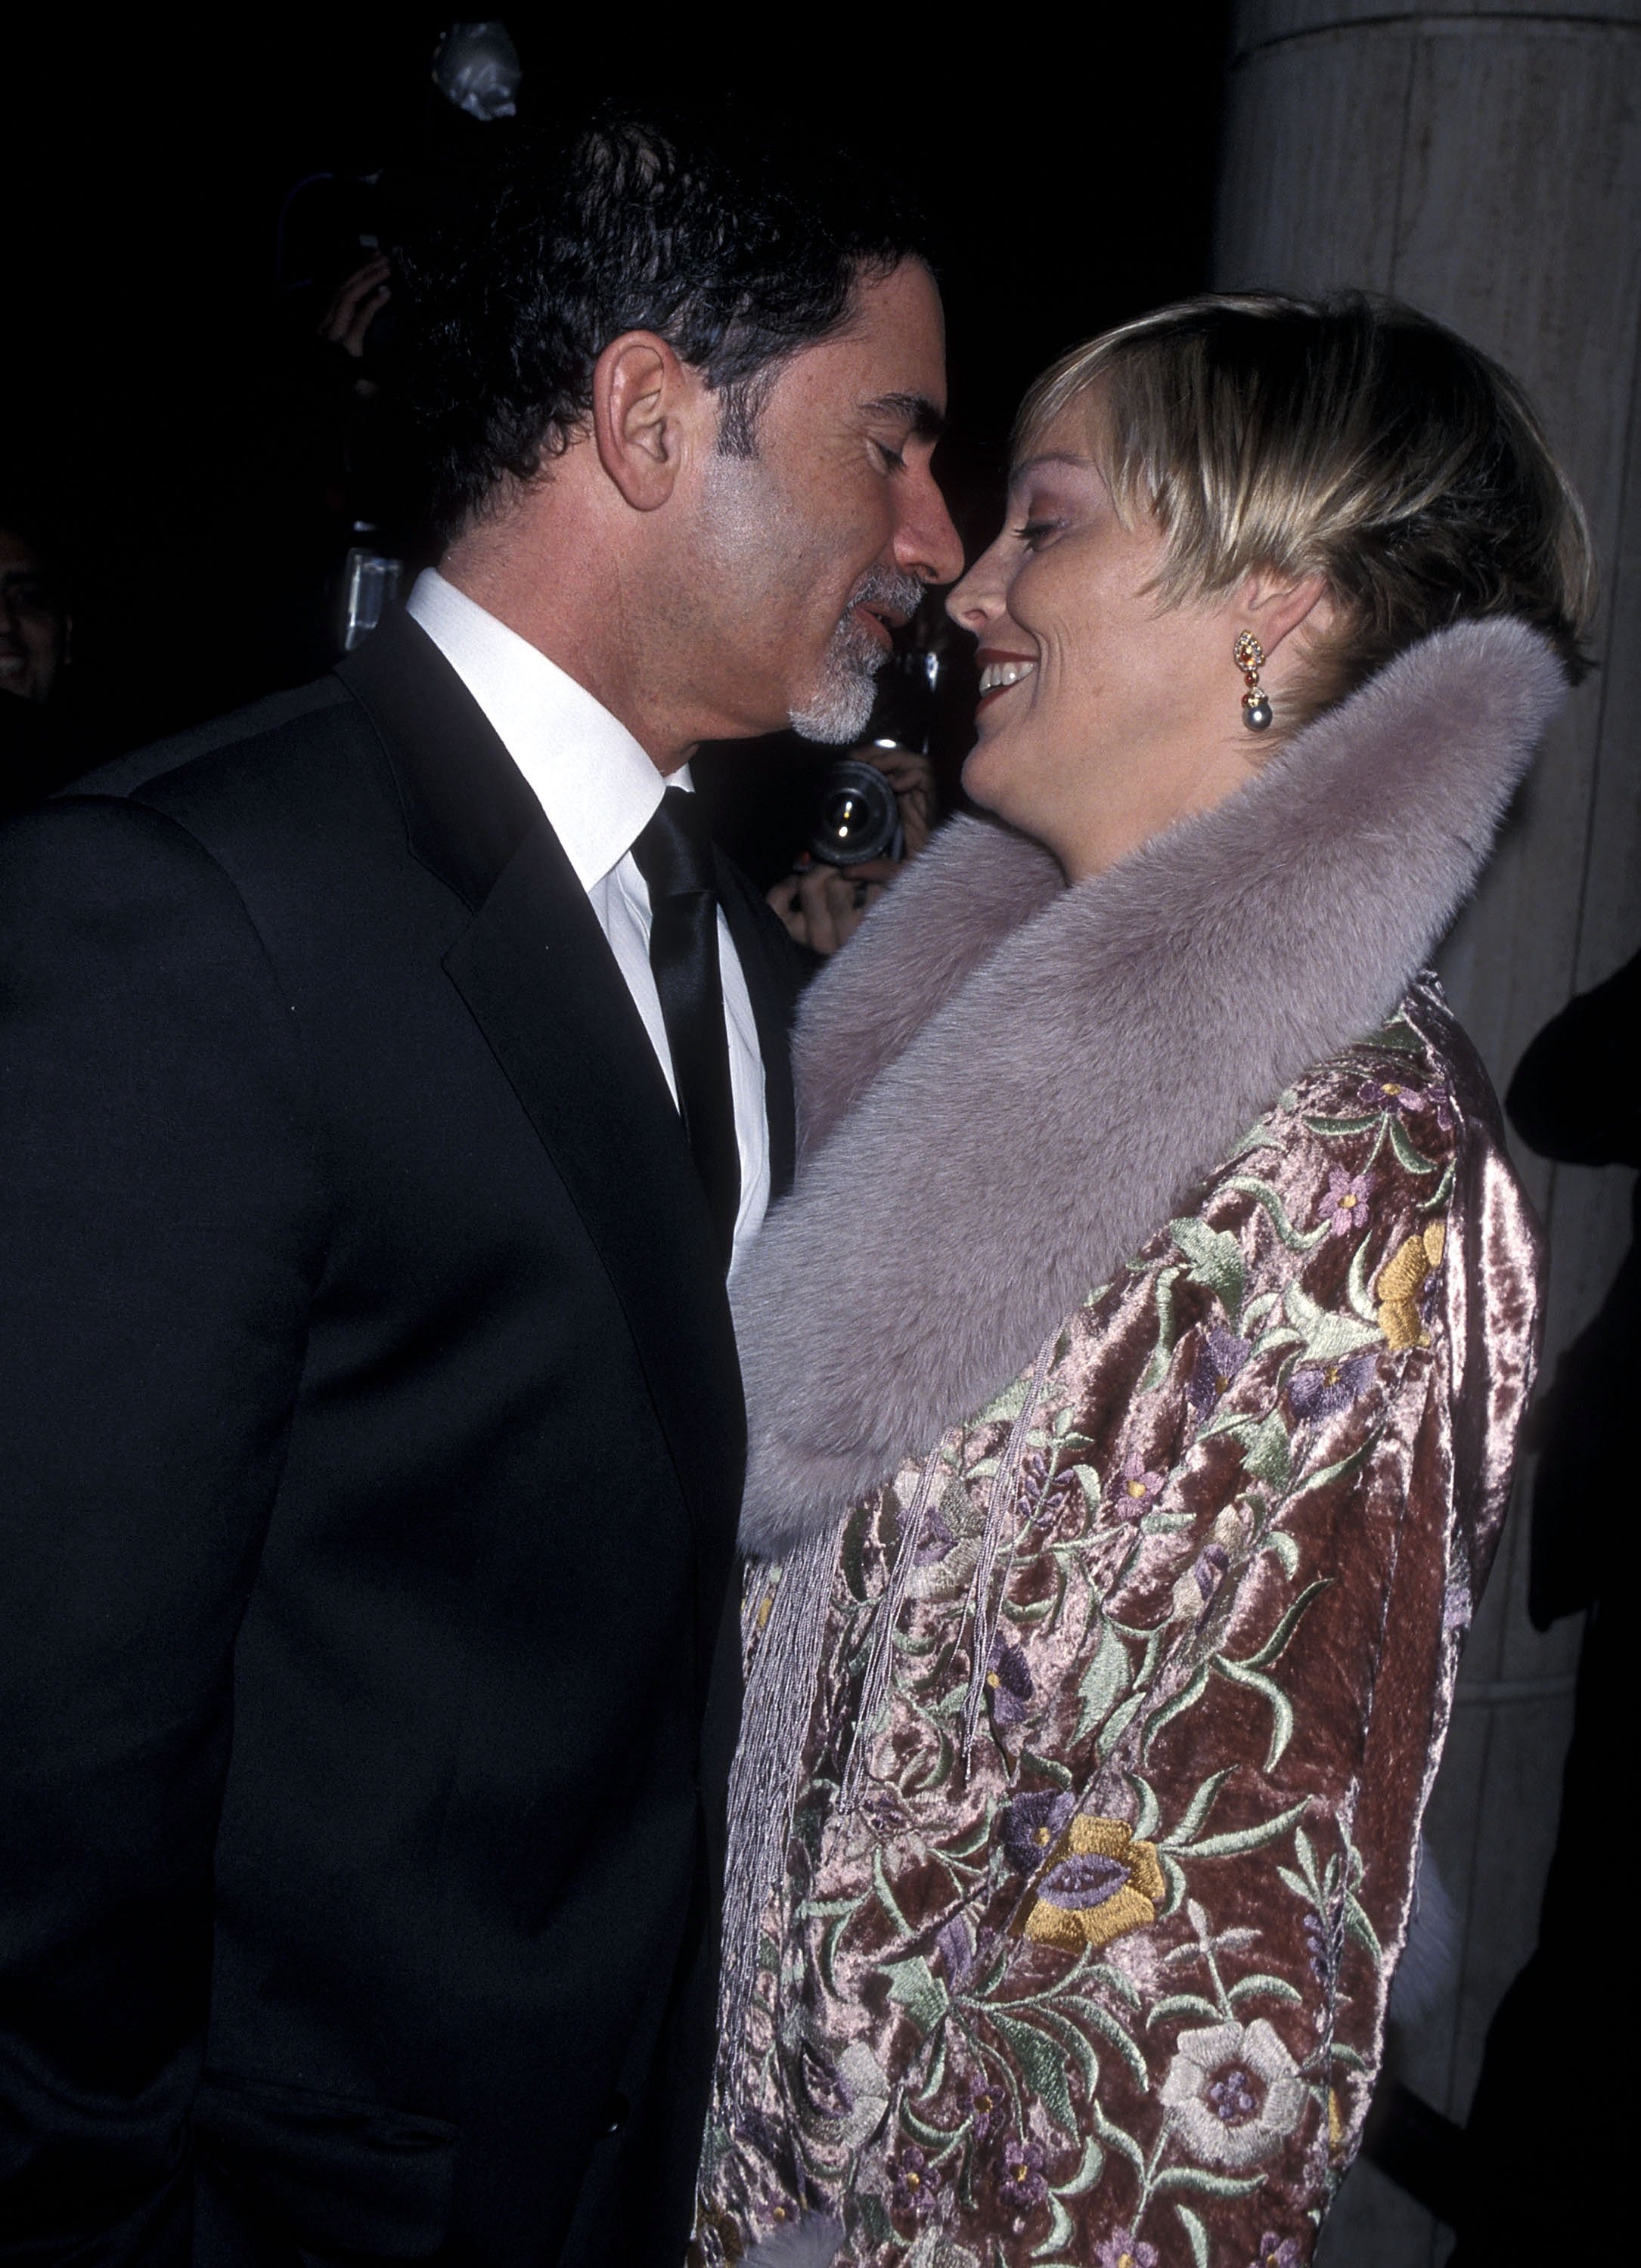 Phil Bronstein and Sharon Stone at the Human Rights Campaign Dinner on February 19, 2000, in Universal City, California. | Source: Ron Galella, Ltd./Ron Galella Collection/Getty Images